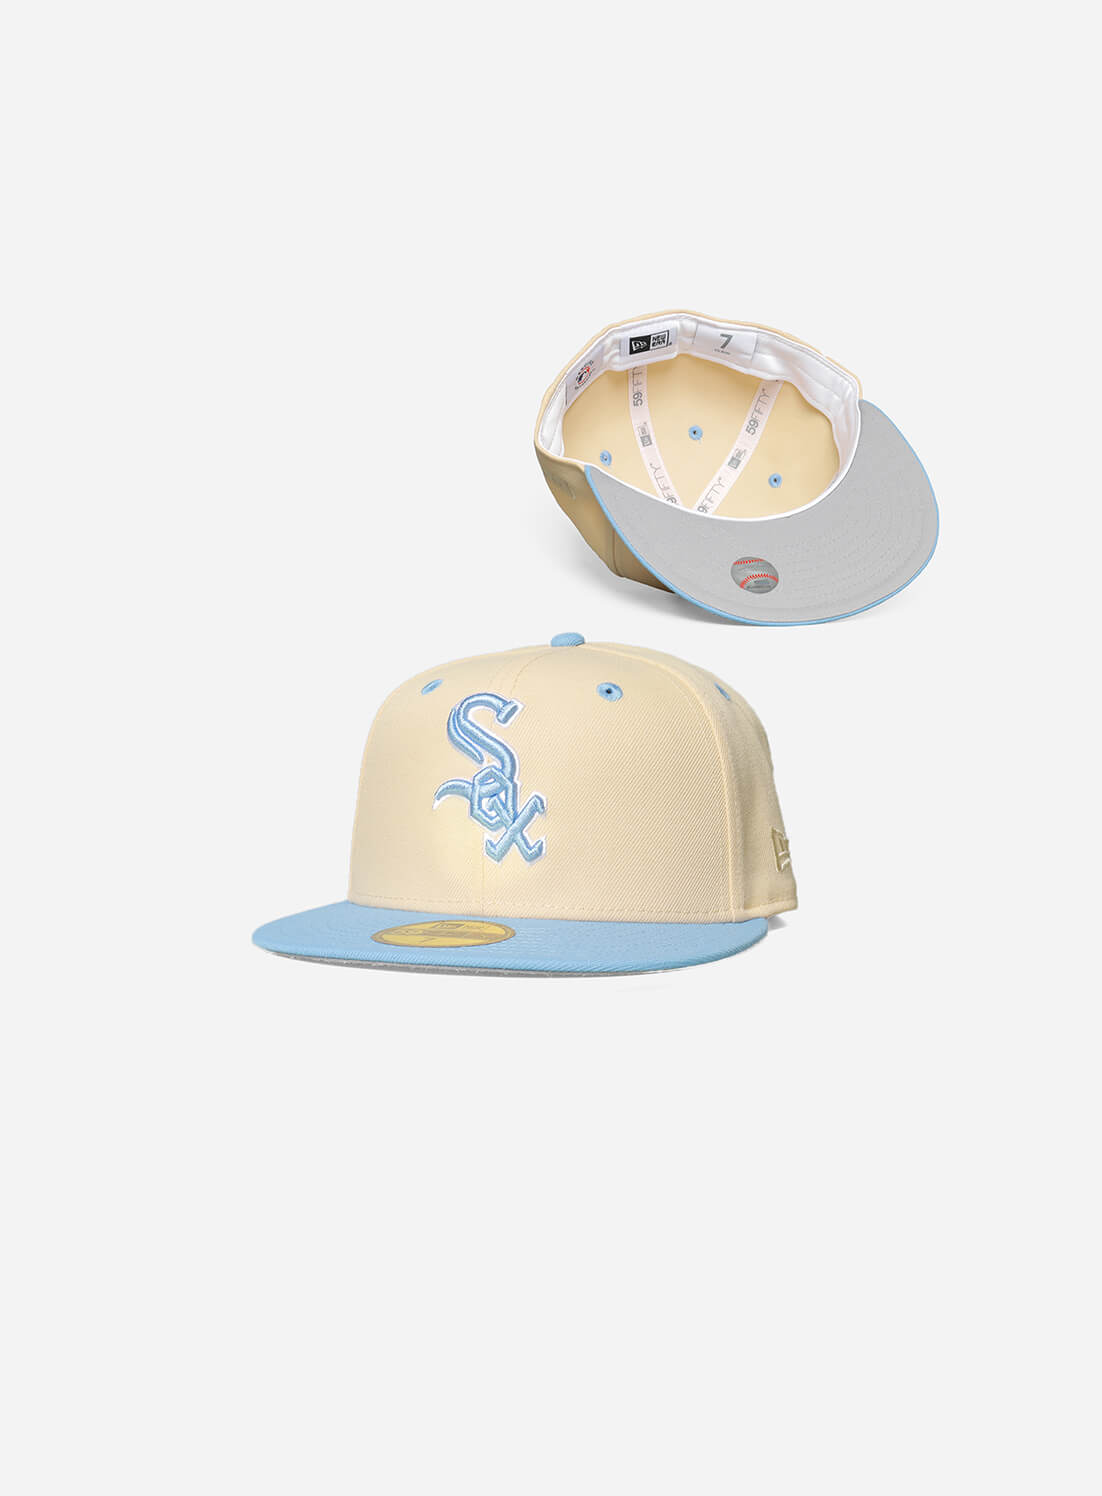 Chicago White Sox Iced Latte 59Fifty Fitted